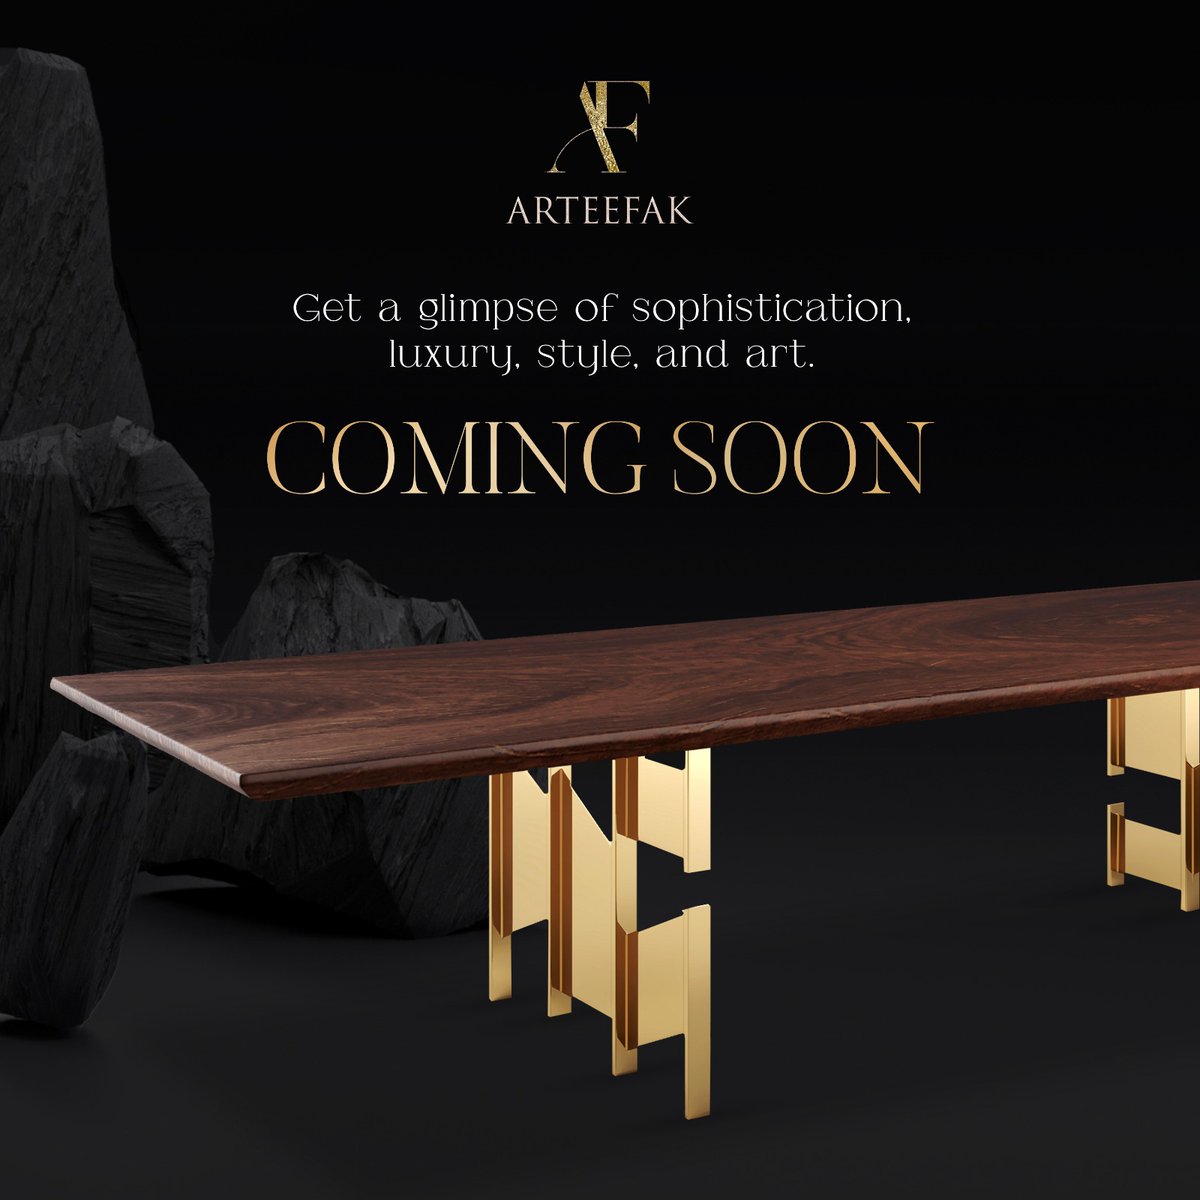 Every home has a story to tell.
Your home is your canvas, create your own masterpiece with Arteefak!
Coming soon to redefine luxury and elegance.

#Arteefak #luxury #art #Comingsoon #canvas #uniquehomedecor #luxuryhome #homestyle #interiorstyling #architecture #staytuned